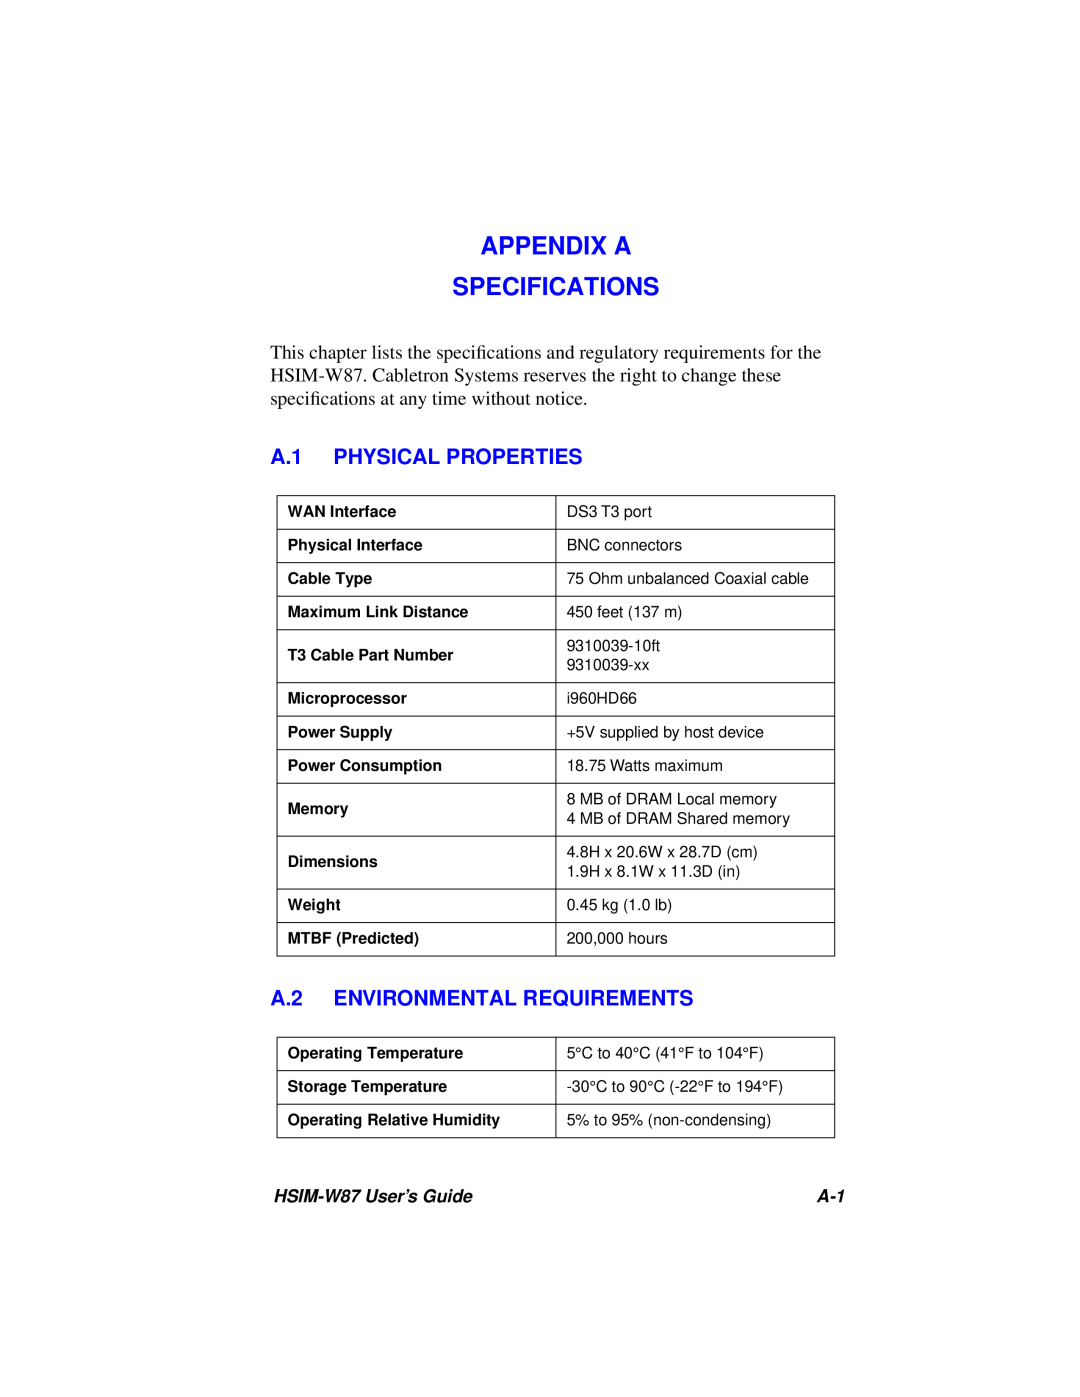 Cabletron Systems HSIM-W87 manual Appendix A Specifications, A.1 PHYSICAL PROPERTIES, A.2 ENVIRONMENTAL REQUIREMENTS 